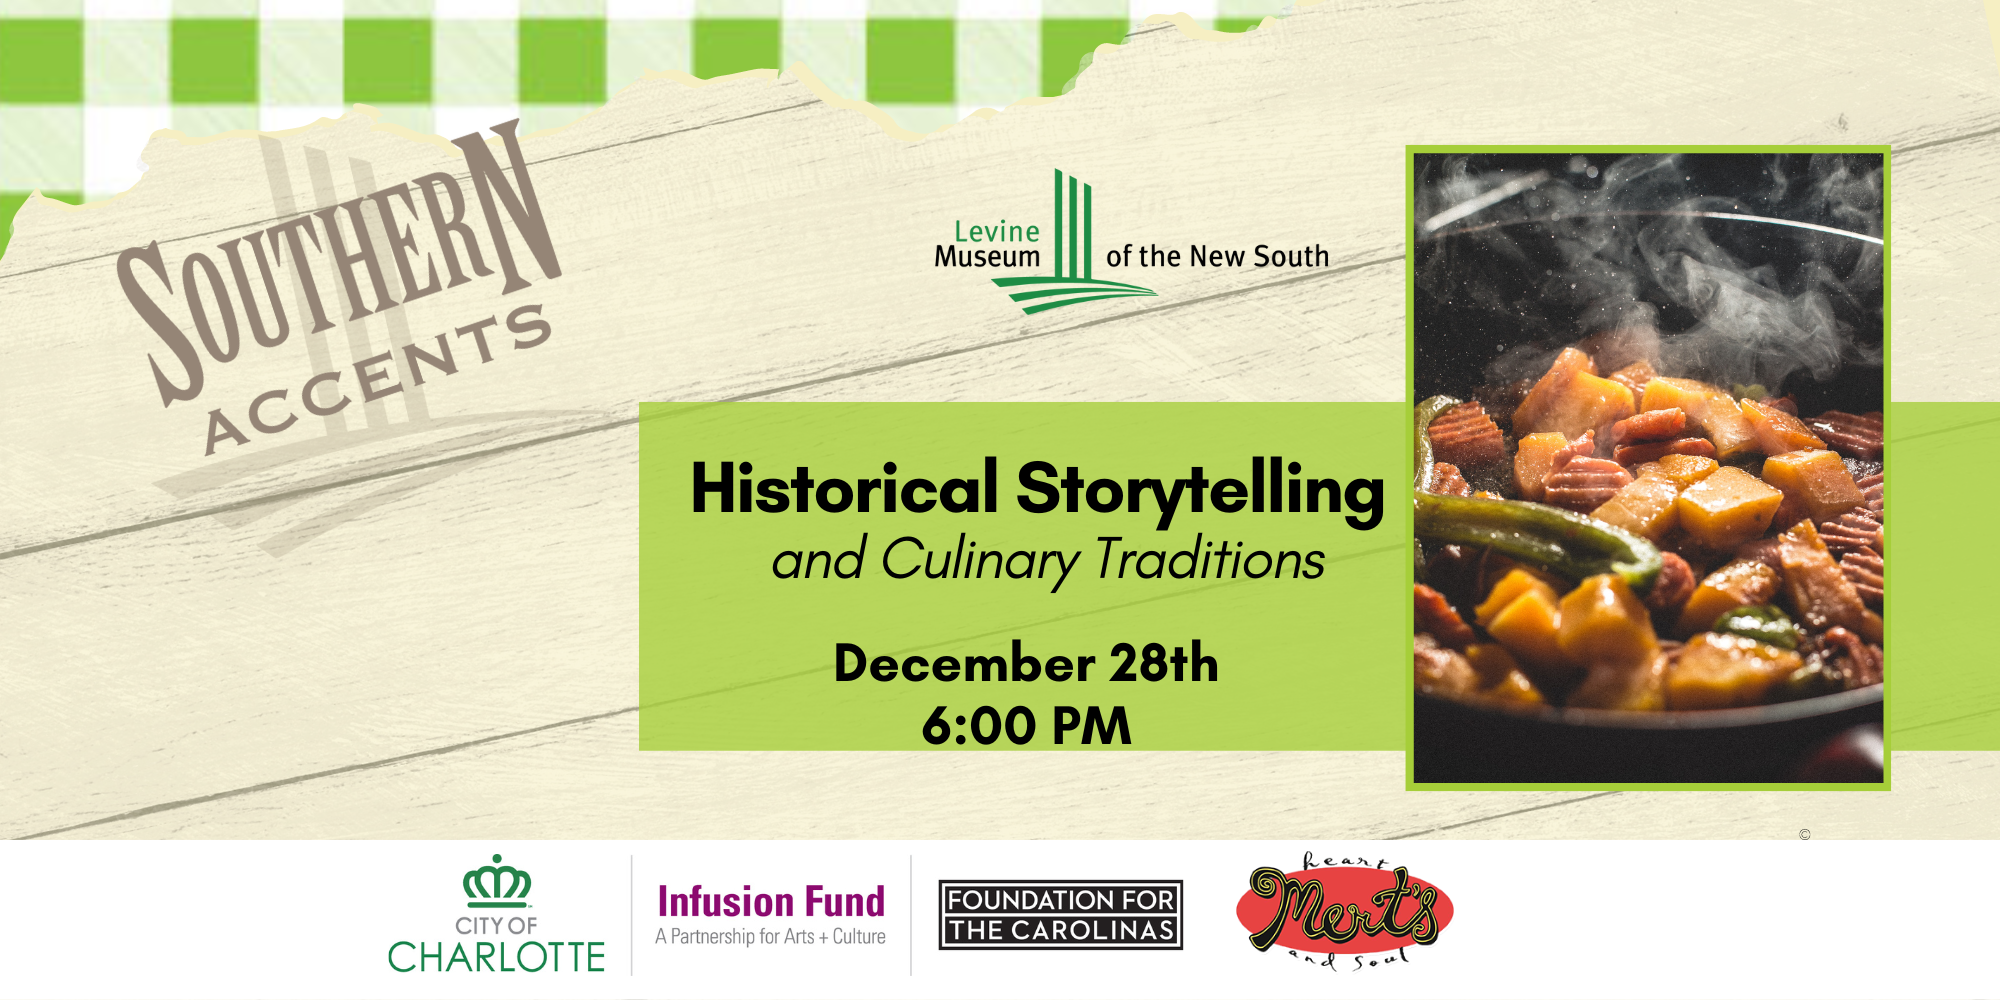 Levine Museum of the New South Southern Accents: Historical Storytelling and Culinary Traditions Event Image